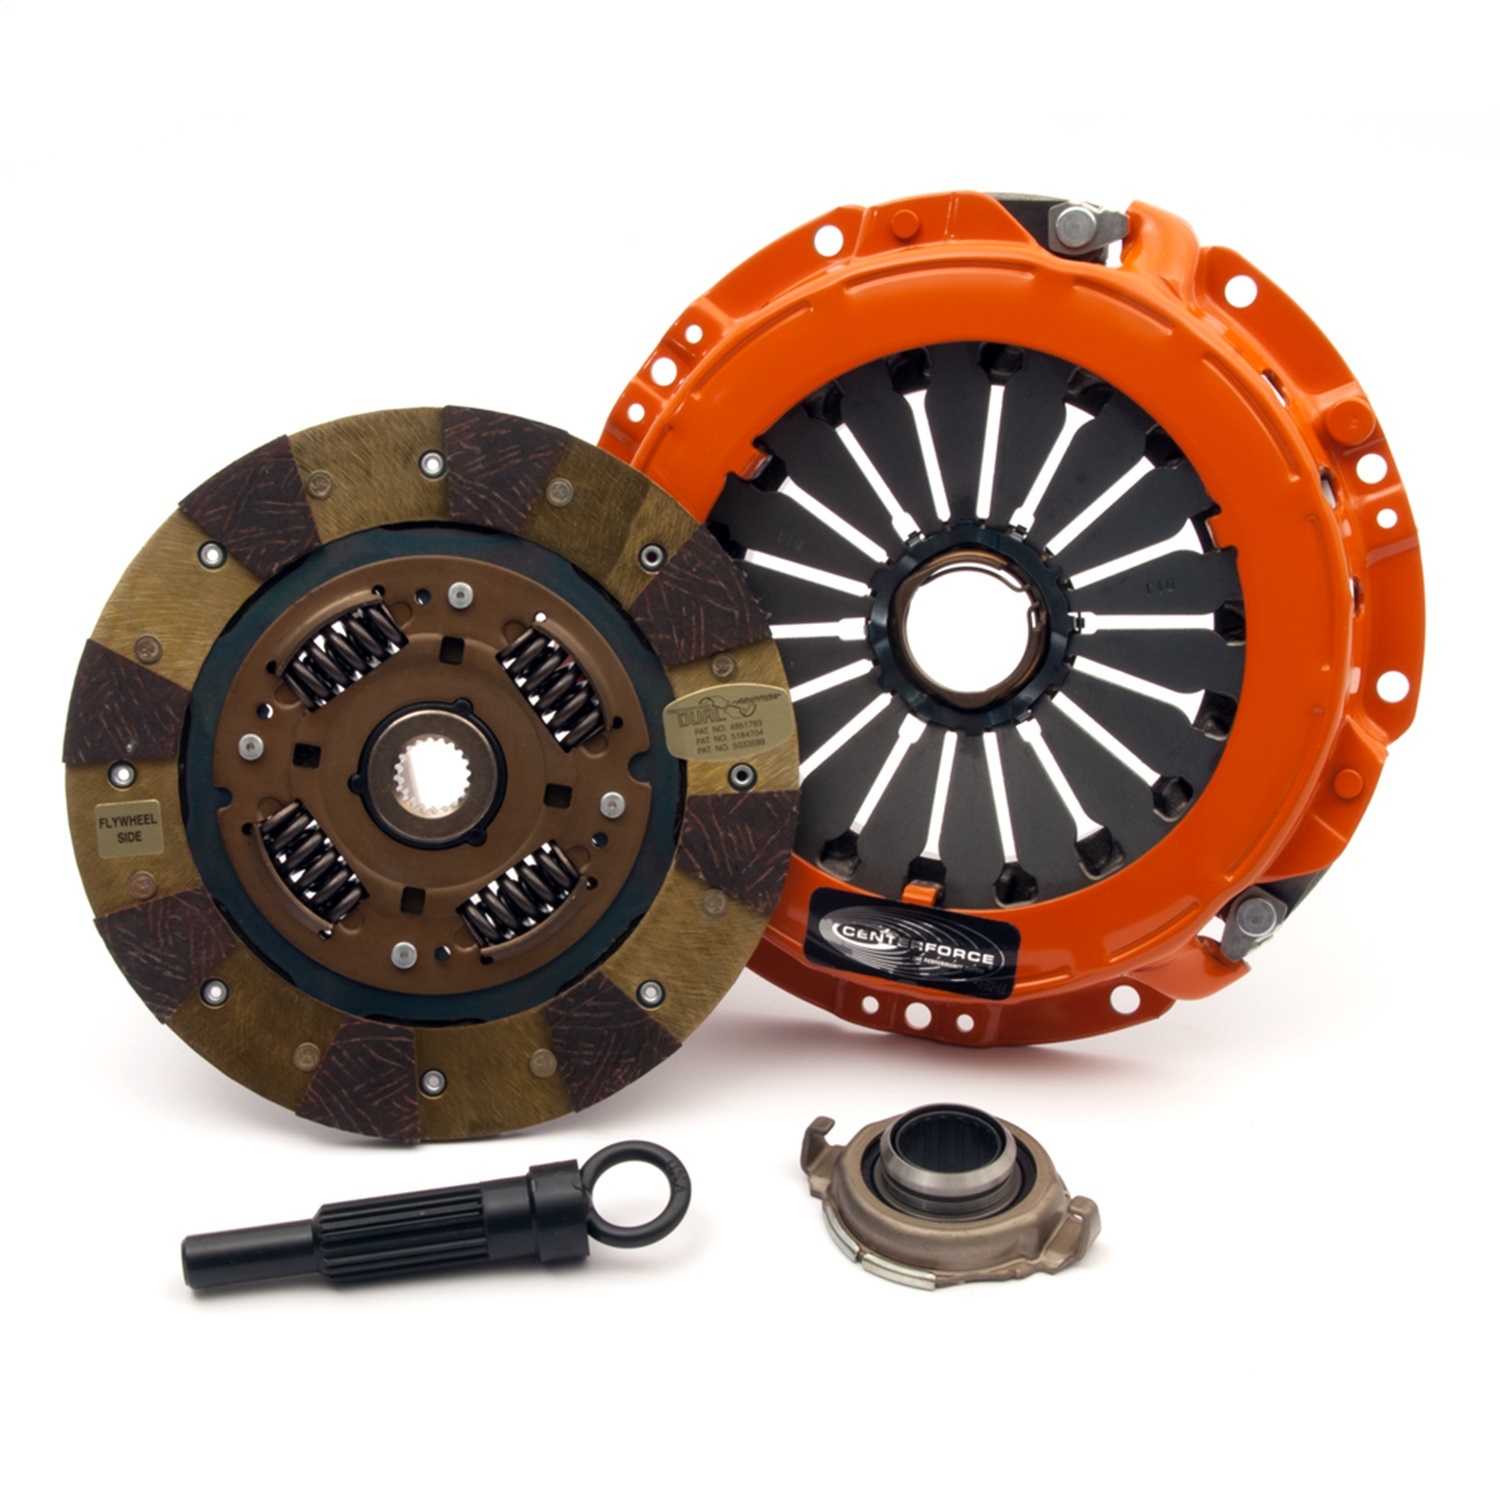 Centerforce Centerforce KDF345778 Dual Friction Clutch Pressure Plate And Disc Set